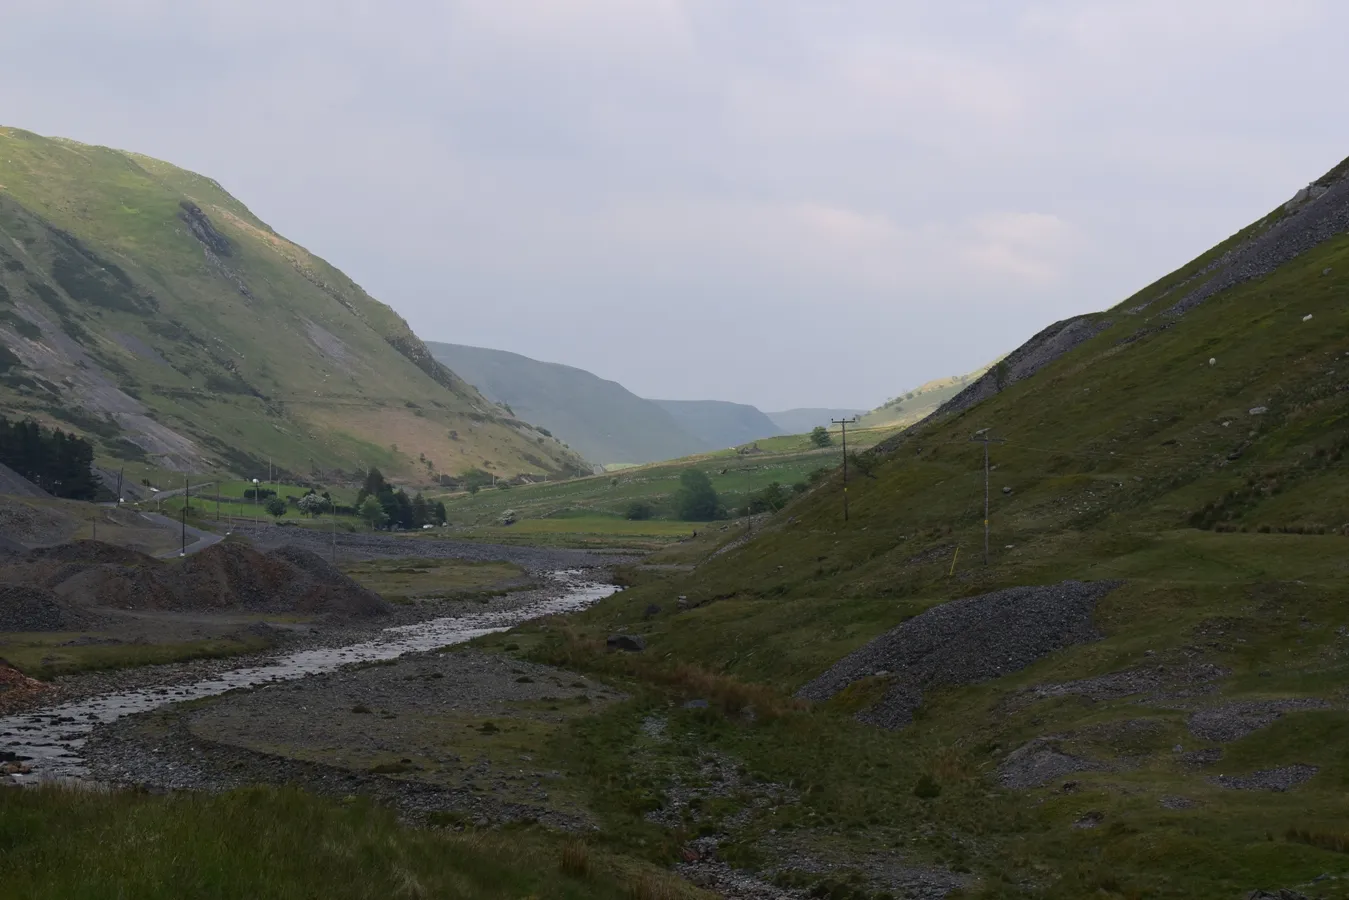 The Elan Valley seen from the Cwmystwyth village